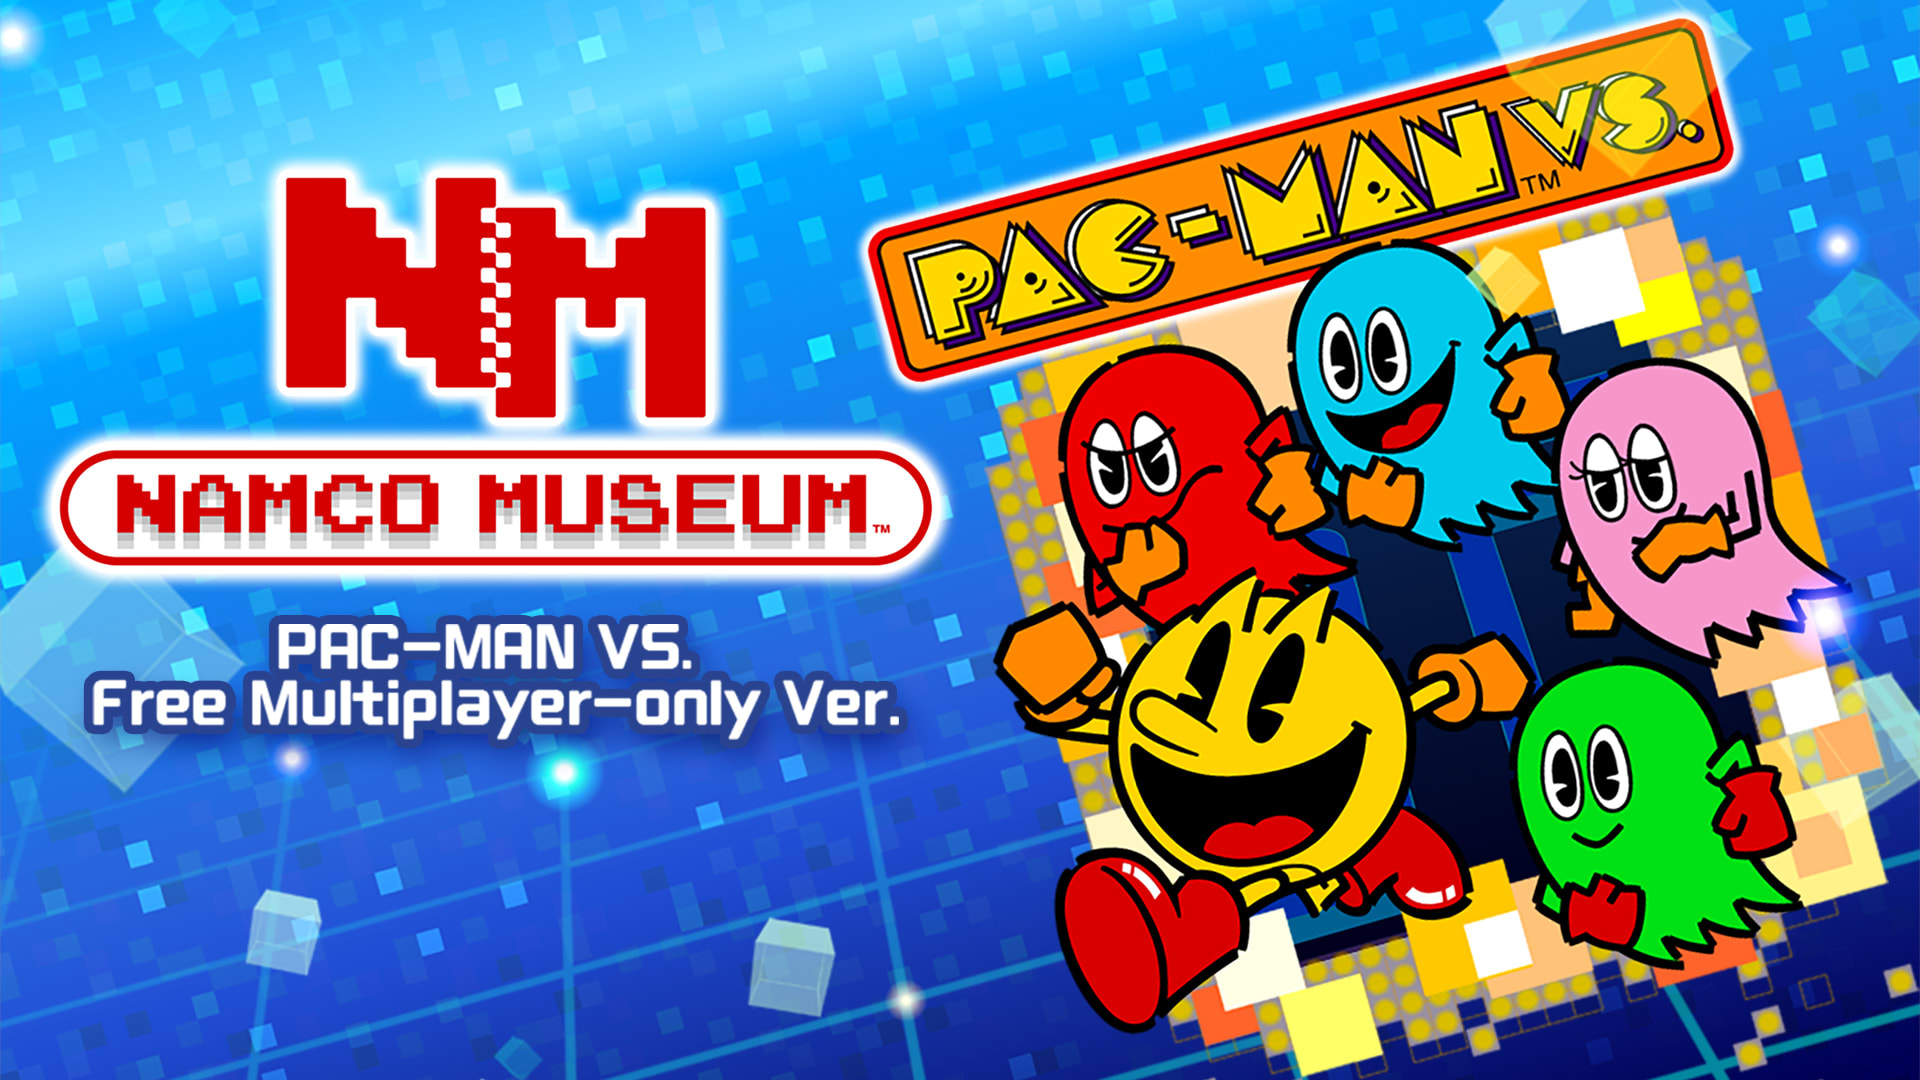 NAMCO MUSEUM (PAC-MAN VS. Free Multiplayer-only Ver.)